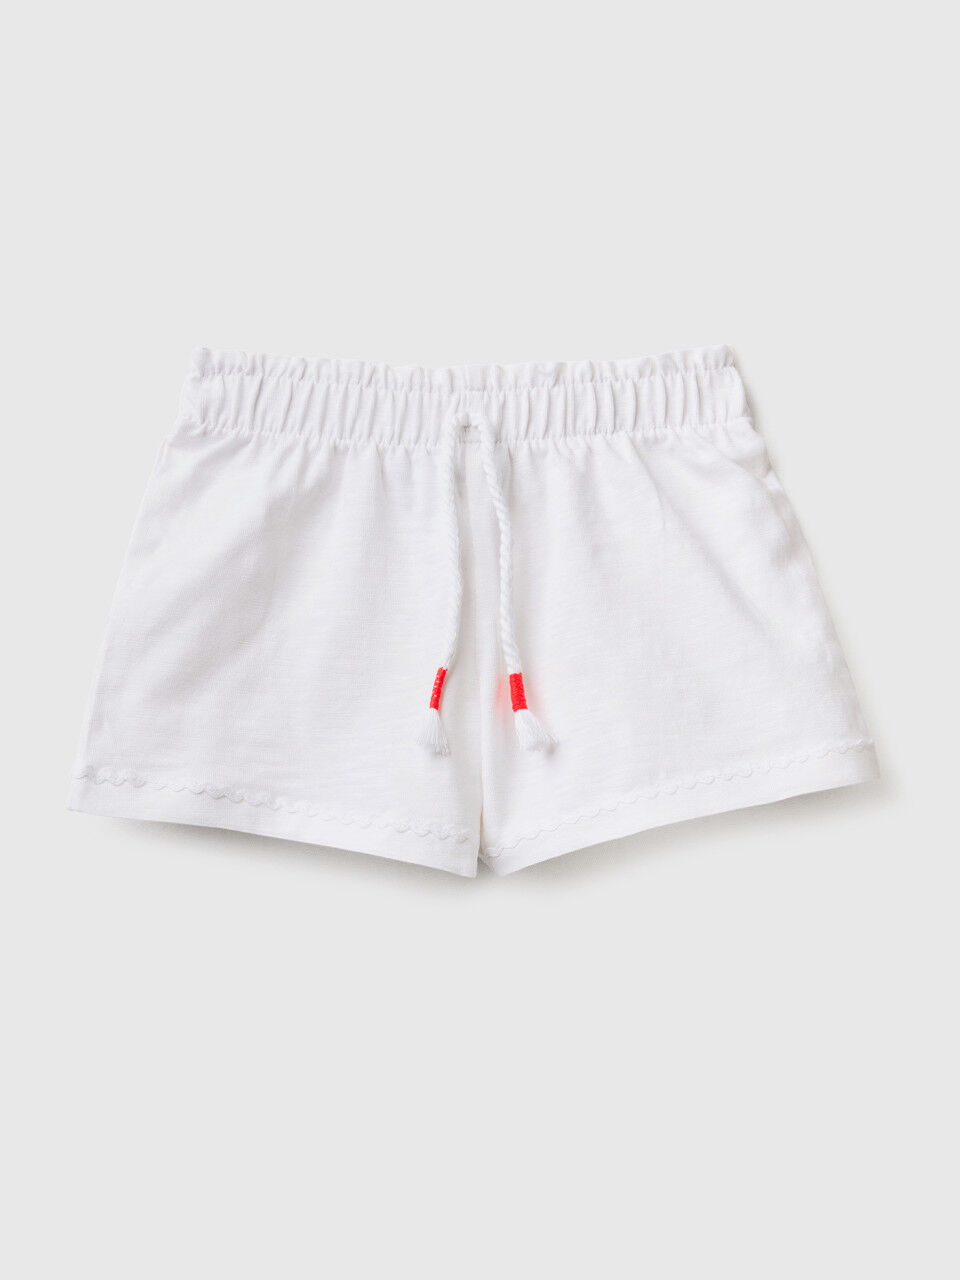 Lightweight shorts with drawstring